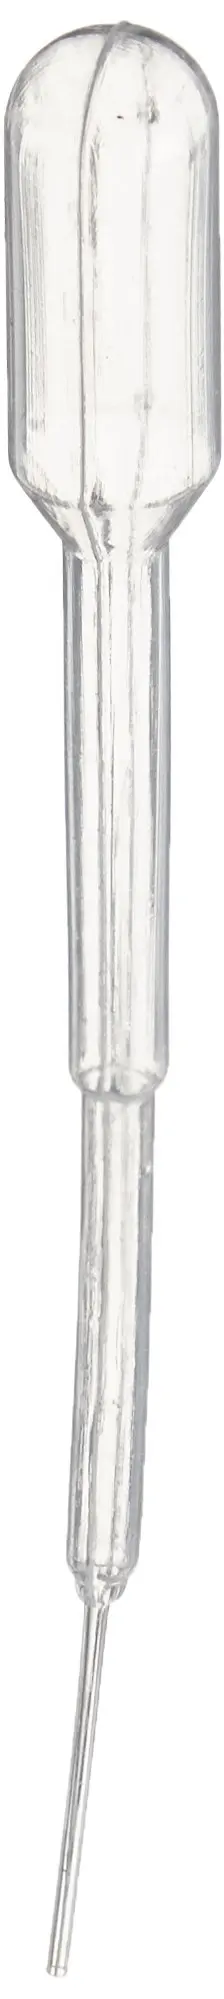 5.0mL Capacity 155mm Length 1.8mL Bulb Draw Non-Sterile Globe Scientific 137040 LDPE Graduated Transfer Pipet for Blood Bank Case of 5000